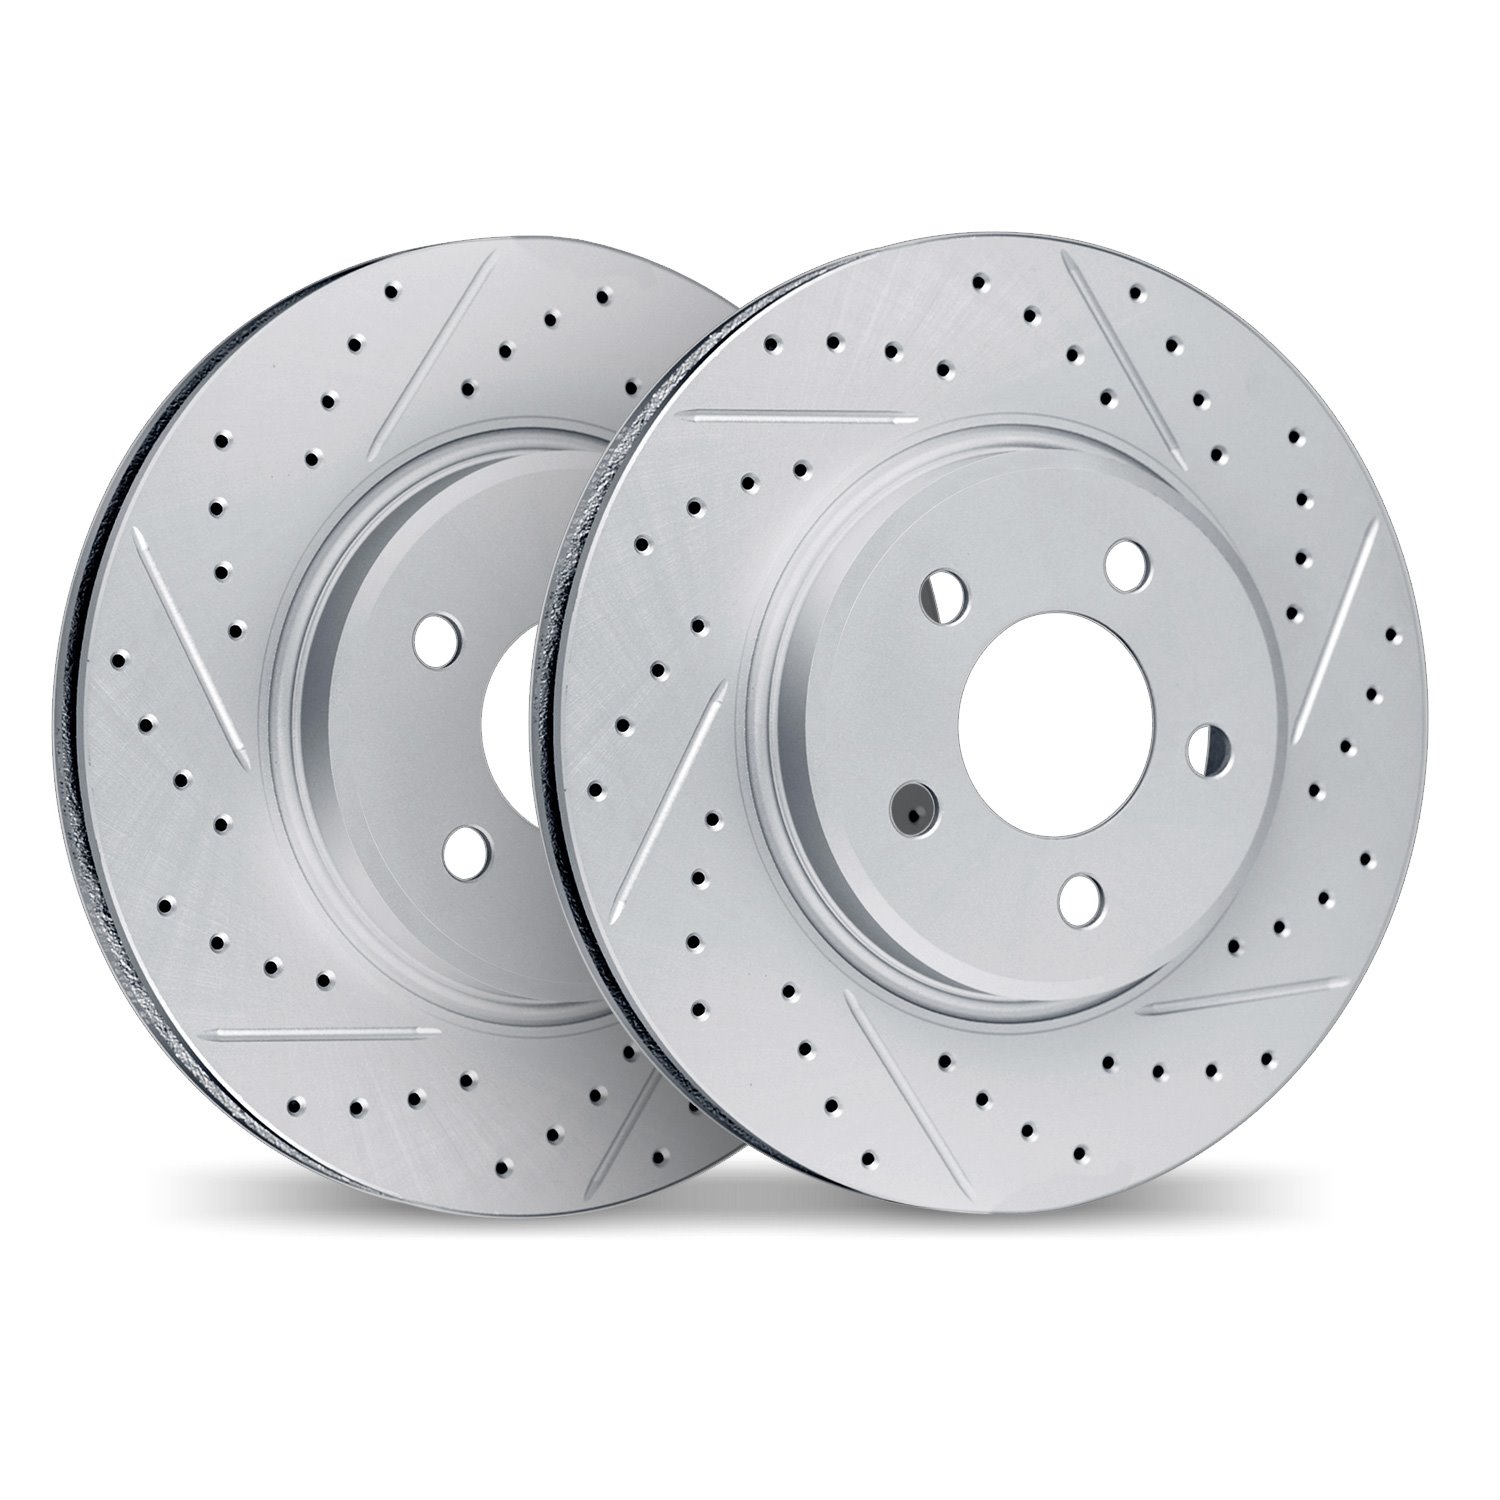 2002-80046 Geoperformance Drilled/Slotted Brake Rotors, 2004-2011 Ford/Lincoln/Mercury/Mazda, Position: Rear